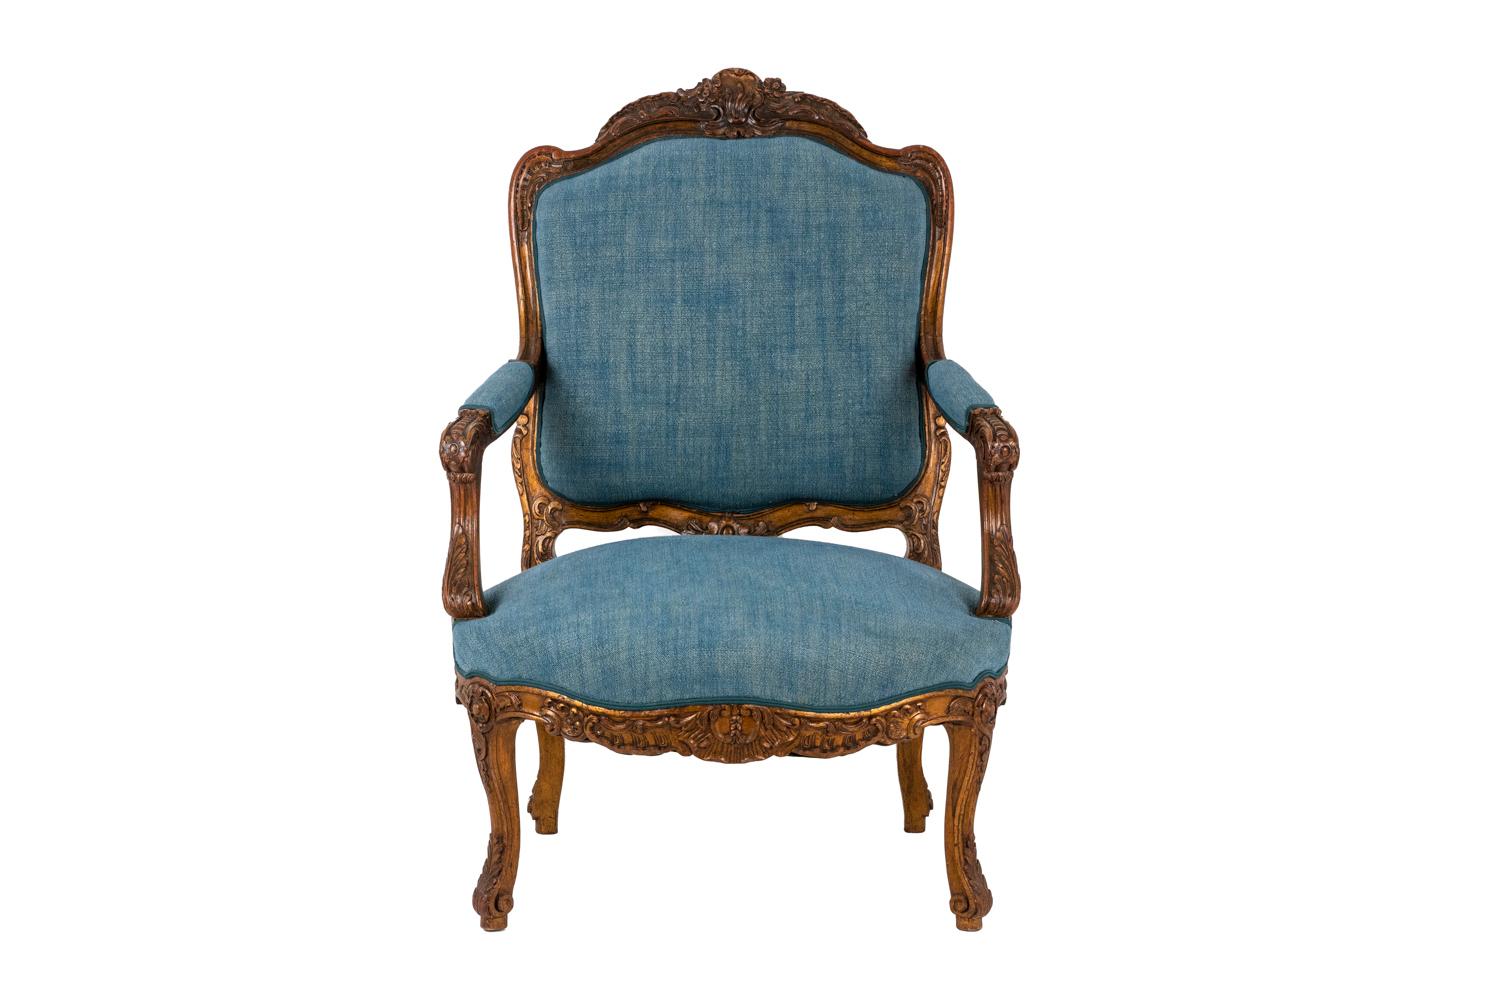 Pair of armchairs with queen's back, scalloped shape, decorated with acanthus leaves and a shell. Belt decorated with acanthus leaves and shell. Armrests consoles set back from the line of the foot. Armrests with cuffs. Curved and molded feet.